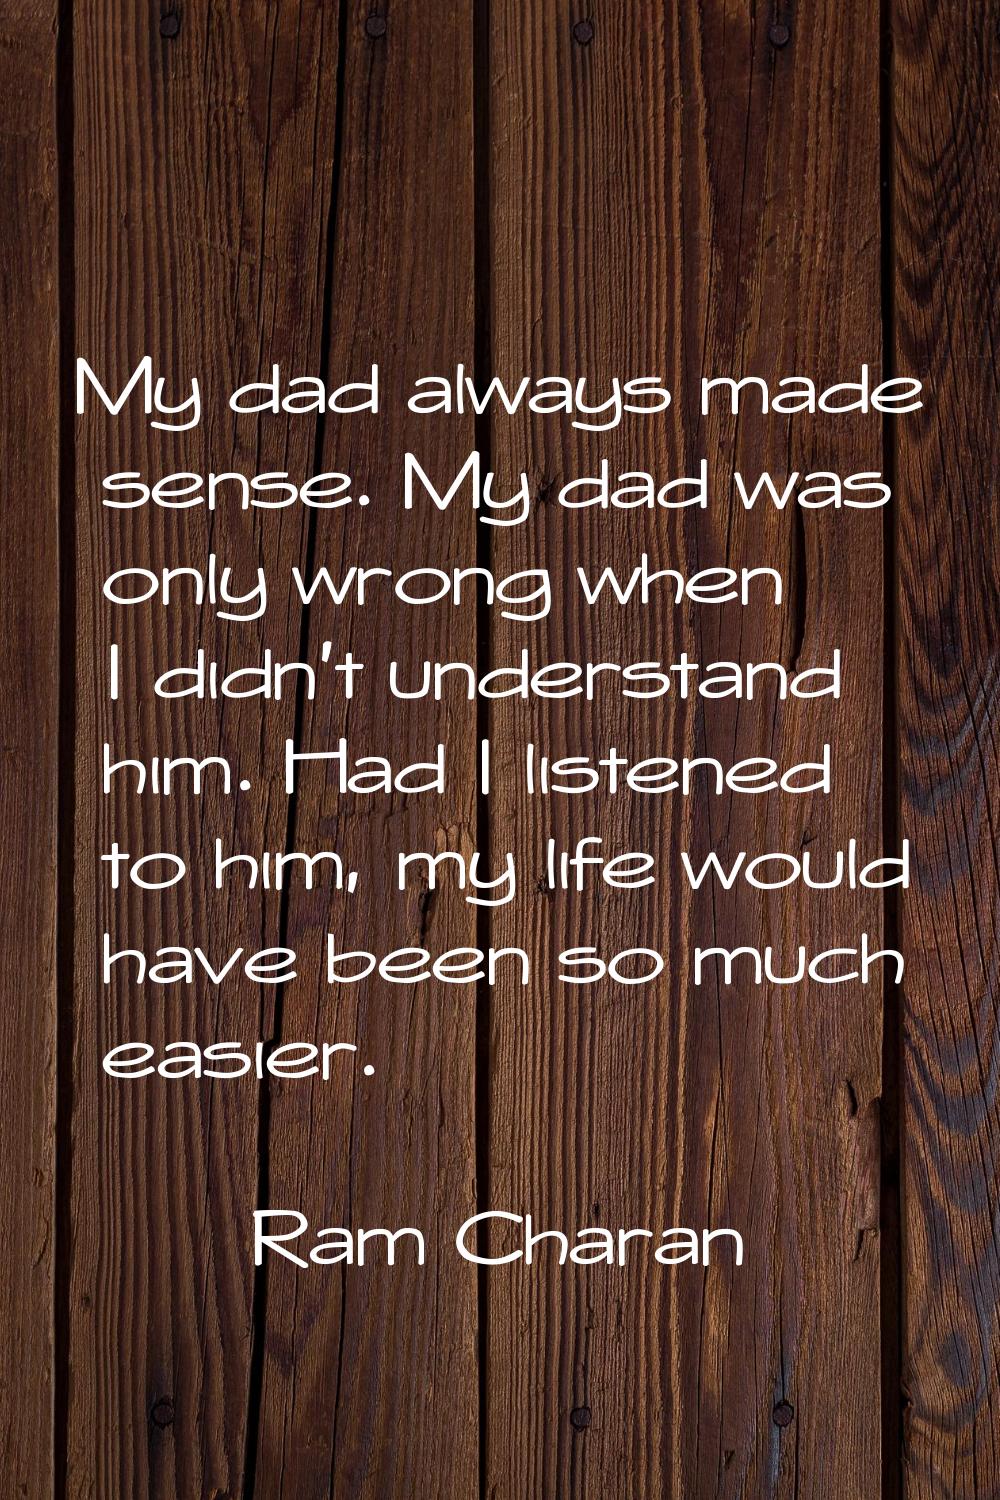 My dad always made sense. My dad was only wrong when I didn't understand him. Had I listened to him